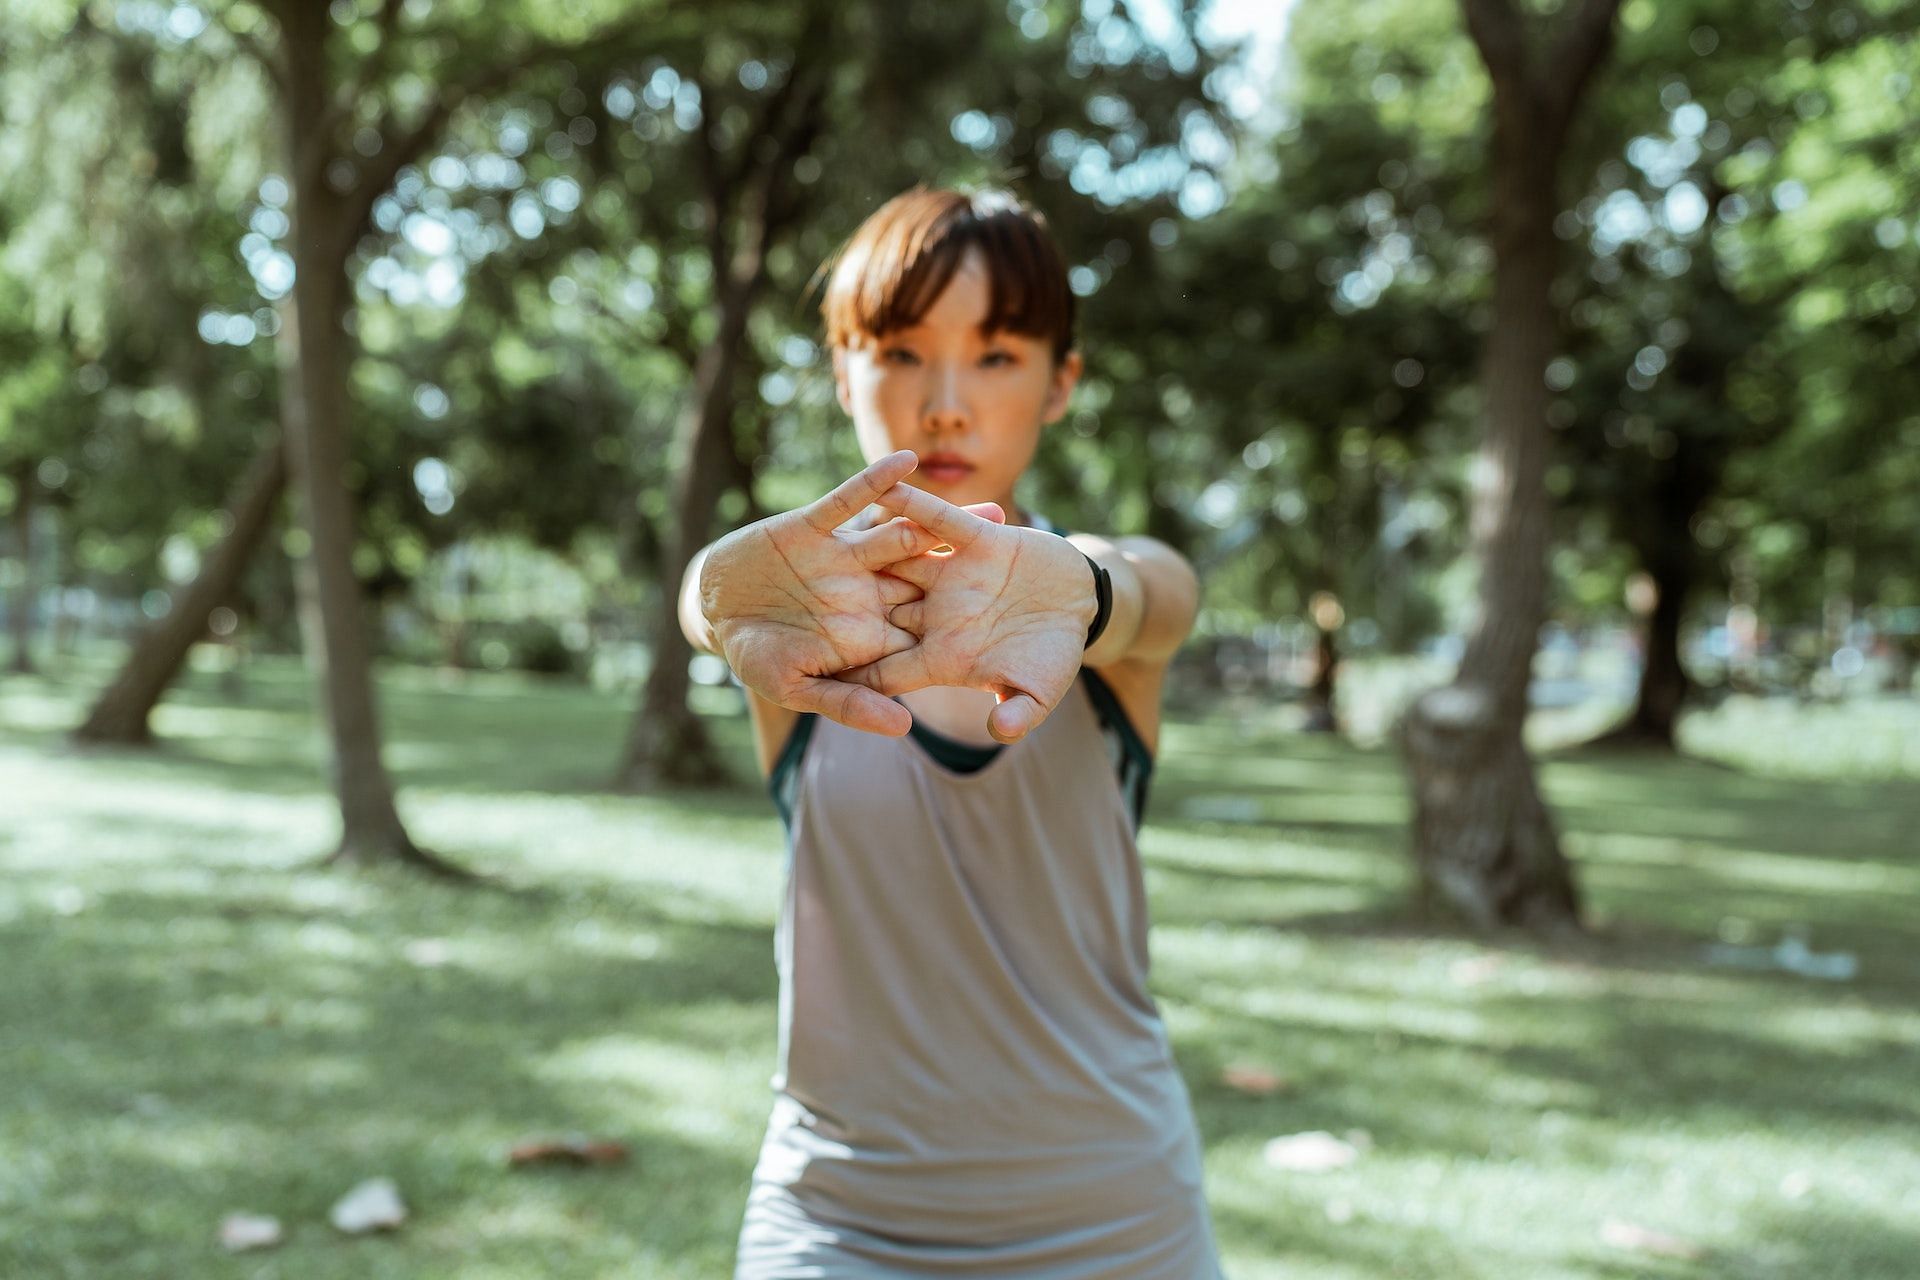 Exercise for hands can improve mobility and flexibility. (Photo via Pexels/Ketut Subiyanto)